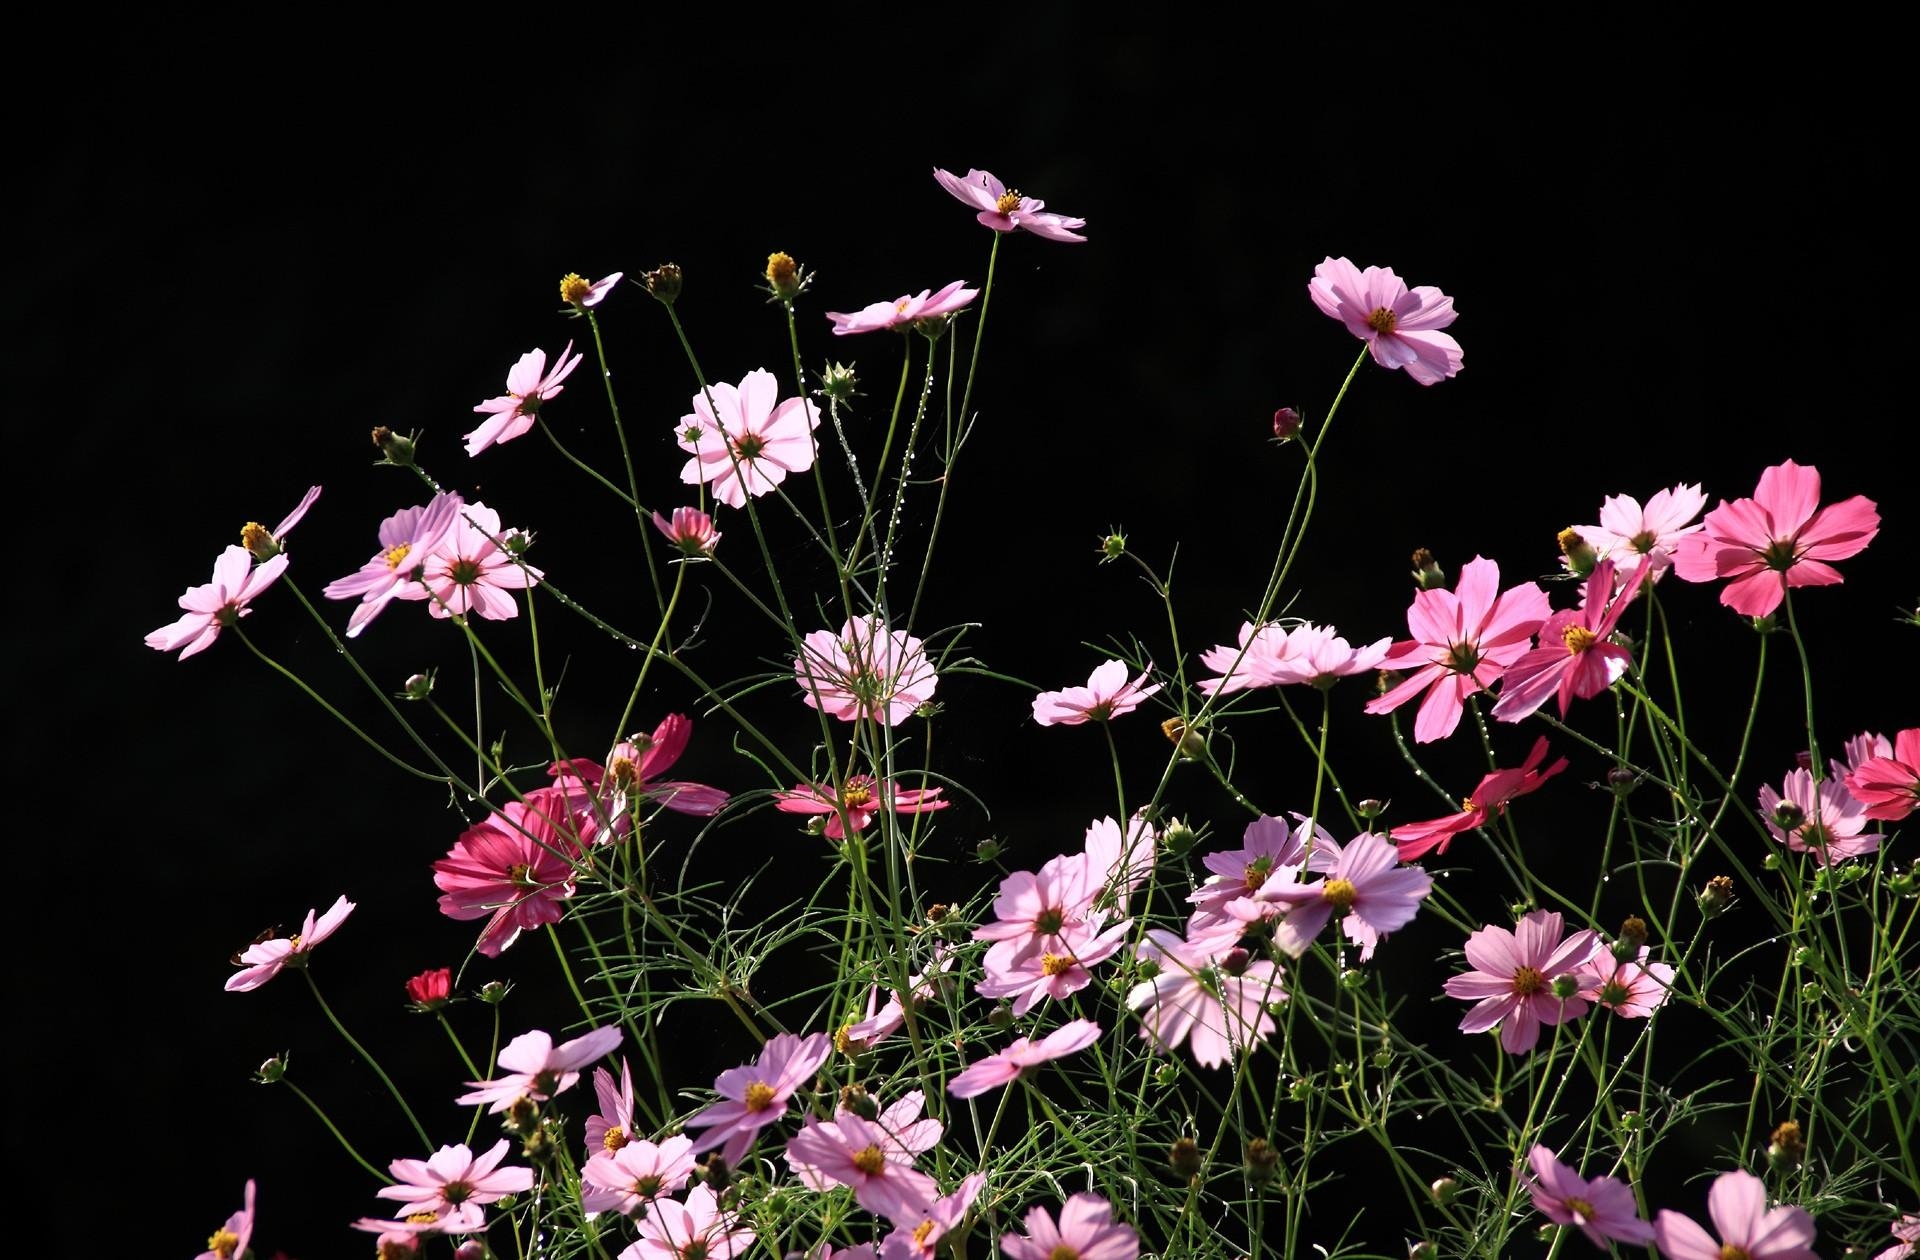 64757 free wallpaper 480x800 for phone, download images cosmos, kosmeya, flowers, black background 480x800 for mobile